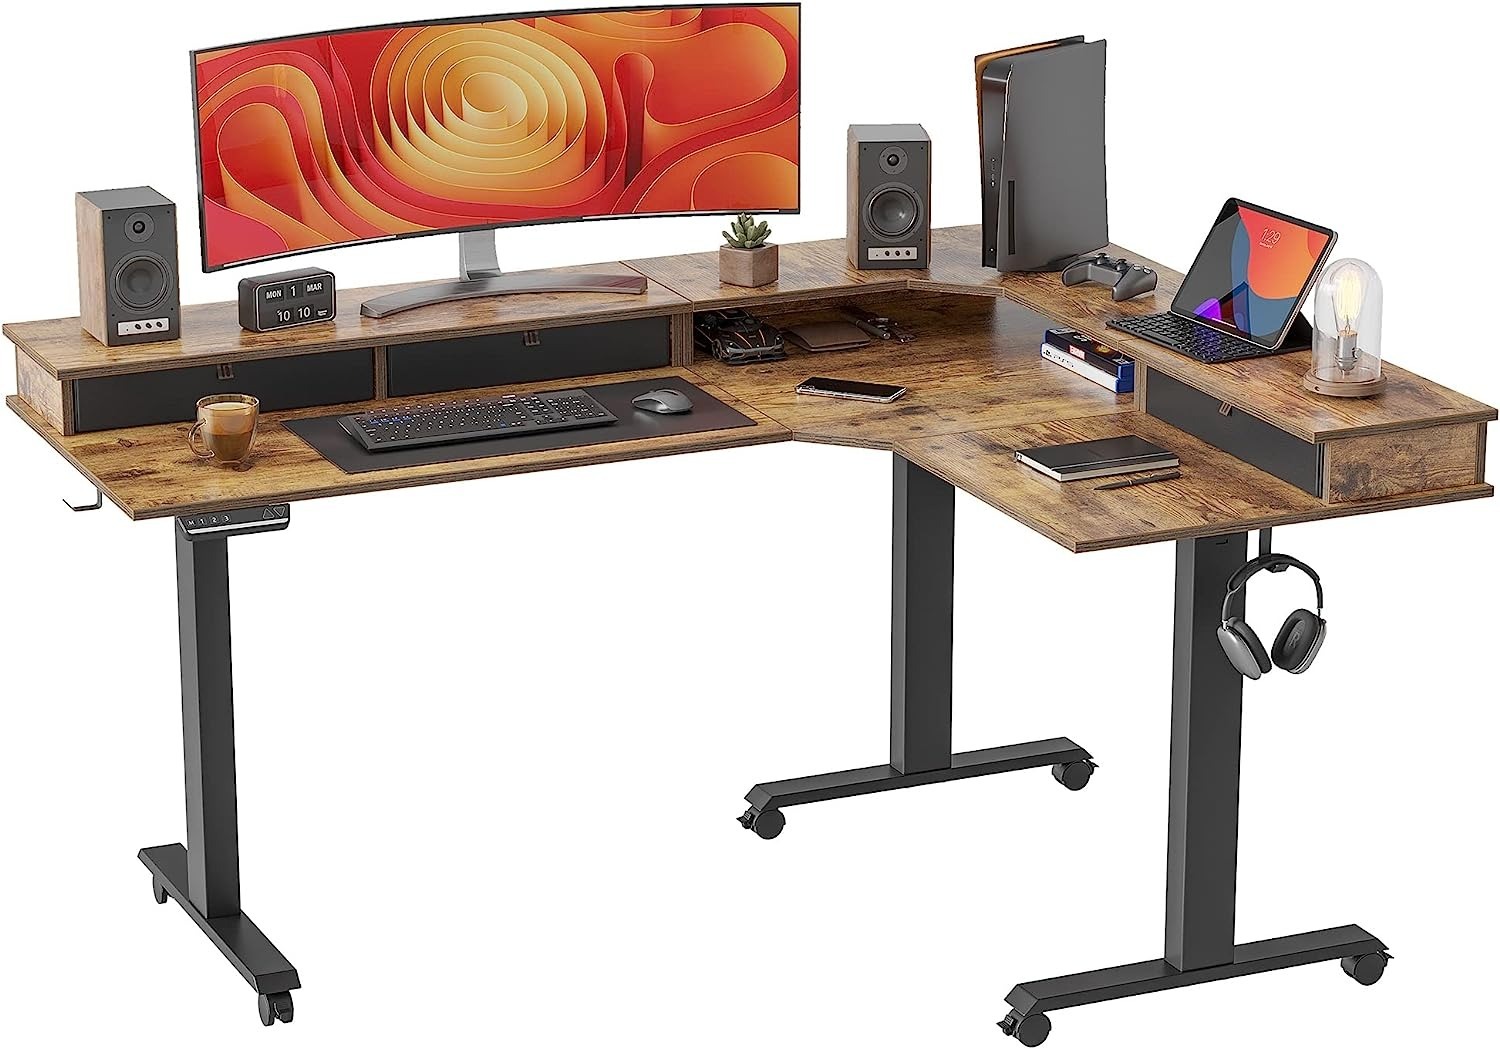 63" FEZIBO L-Shaped Height Adjustable Electric Triple Motor Standing Desk w/ 3 Drawers (Rustic Brown Top + Black Frame) $400 + Free Shipping